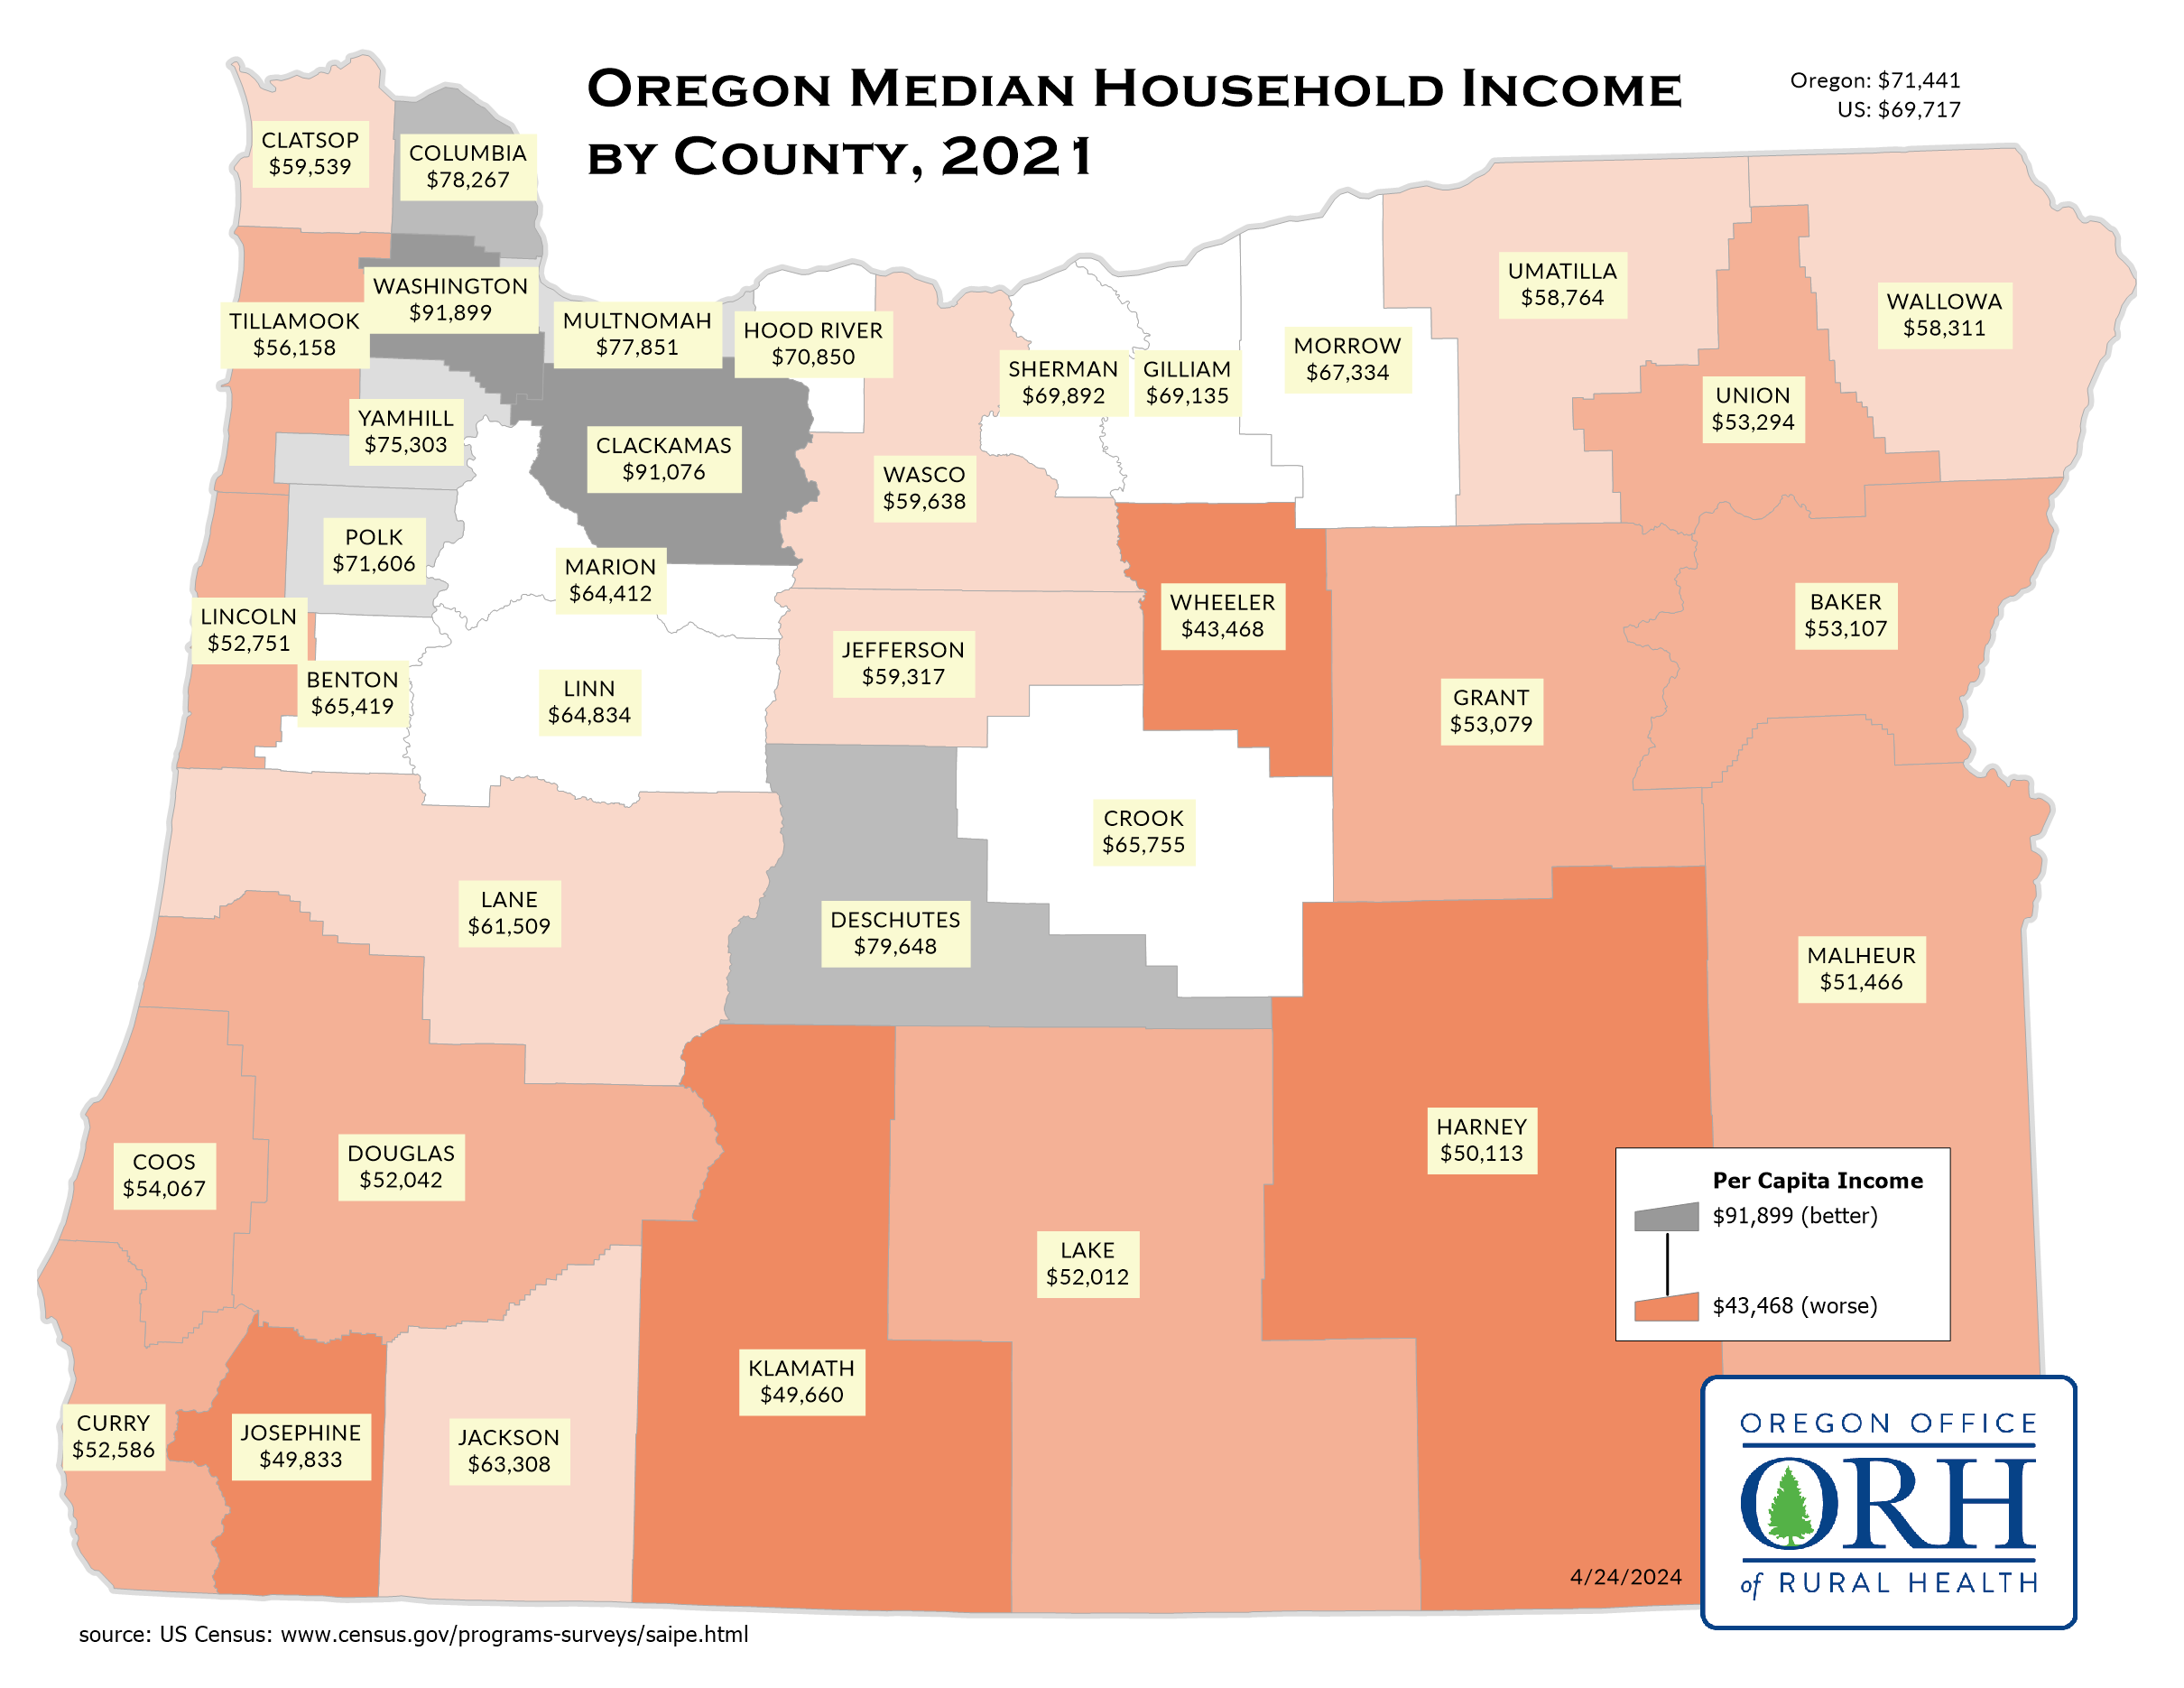 Median Household Income by OR County 